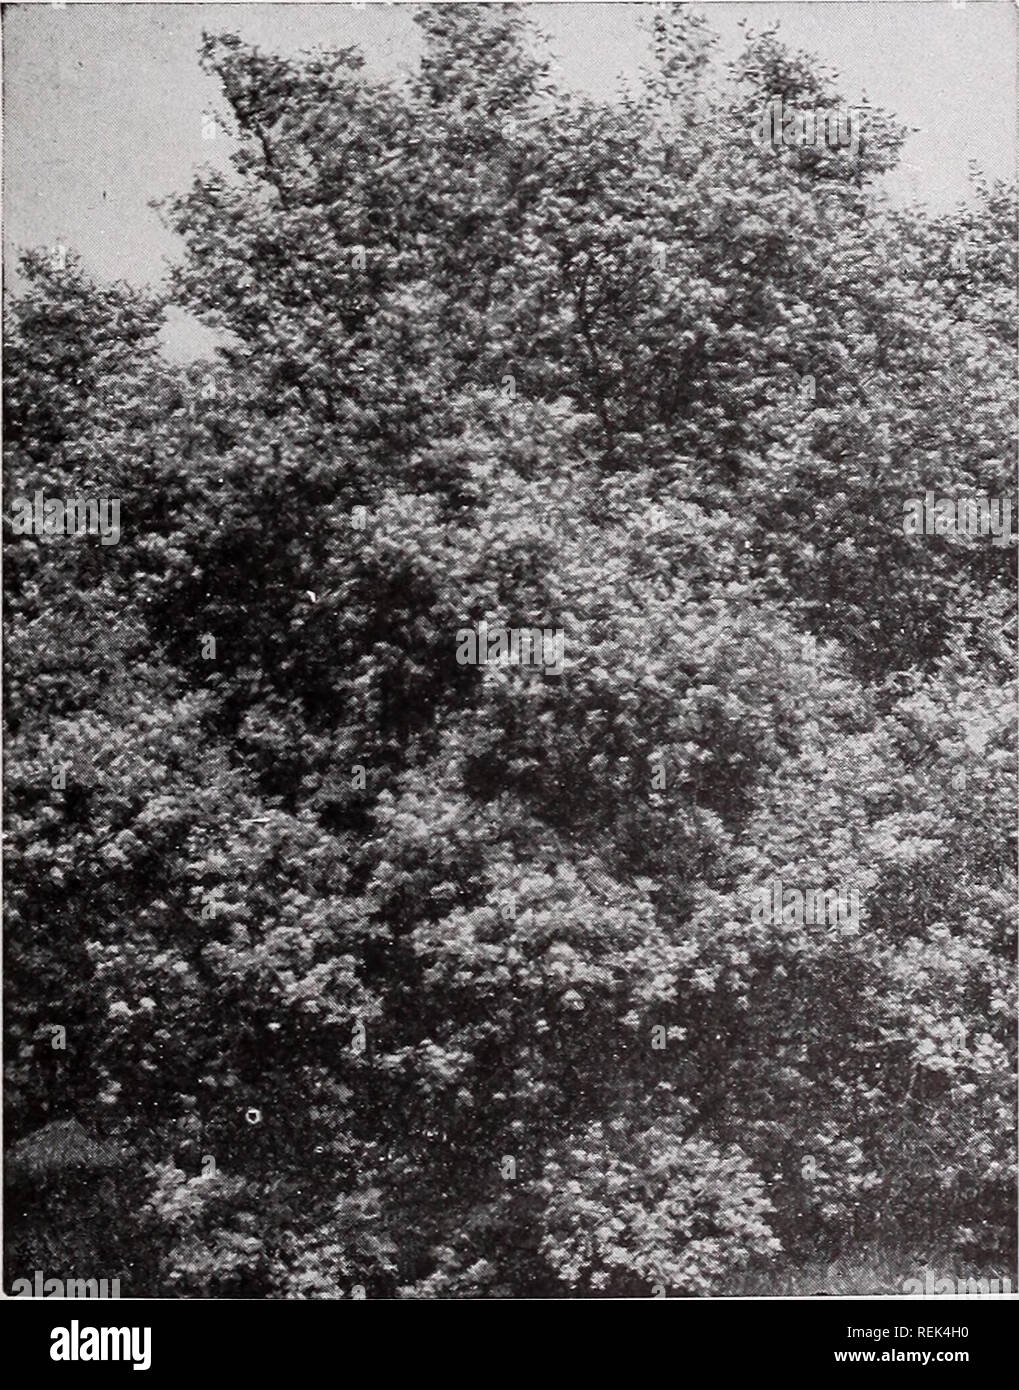 . C. M. Hobbs &amp; Sons. Nurseries Horticulture Catalogs; Evergreens Catalogs; Fruit trees Catalogs; Climbing plants Catalogs; Shrubs Catalogs; Flowers Catalogs; Vegetables Catalogs. C. M. HOBBS &amp; SONS, BRIDGEPORT, INDIANA 43 ELDER - Sambucus Common Elder (S. Canadensis)—A large showy shrub, very ornamental in foliage, fruit and flowers and blossoming in June; flowers are white, borne in large panicles; fruit reddish- purple berries in the fall. Cut Leaved Elder (S. Nigra, var. Laciniata)— One of the best cut-leaved shrubs; a valuable variety with elegantly divided leaves. Golden Elder (S Stock Photo